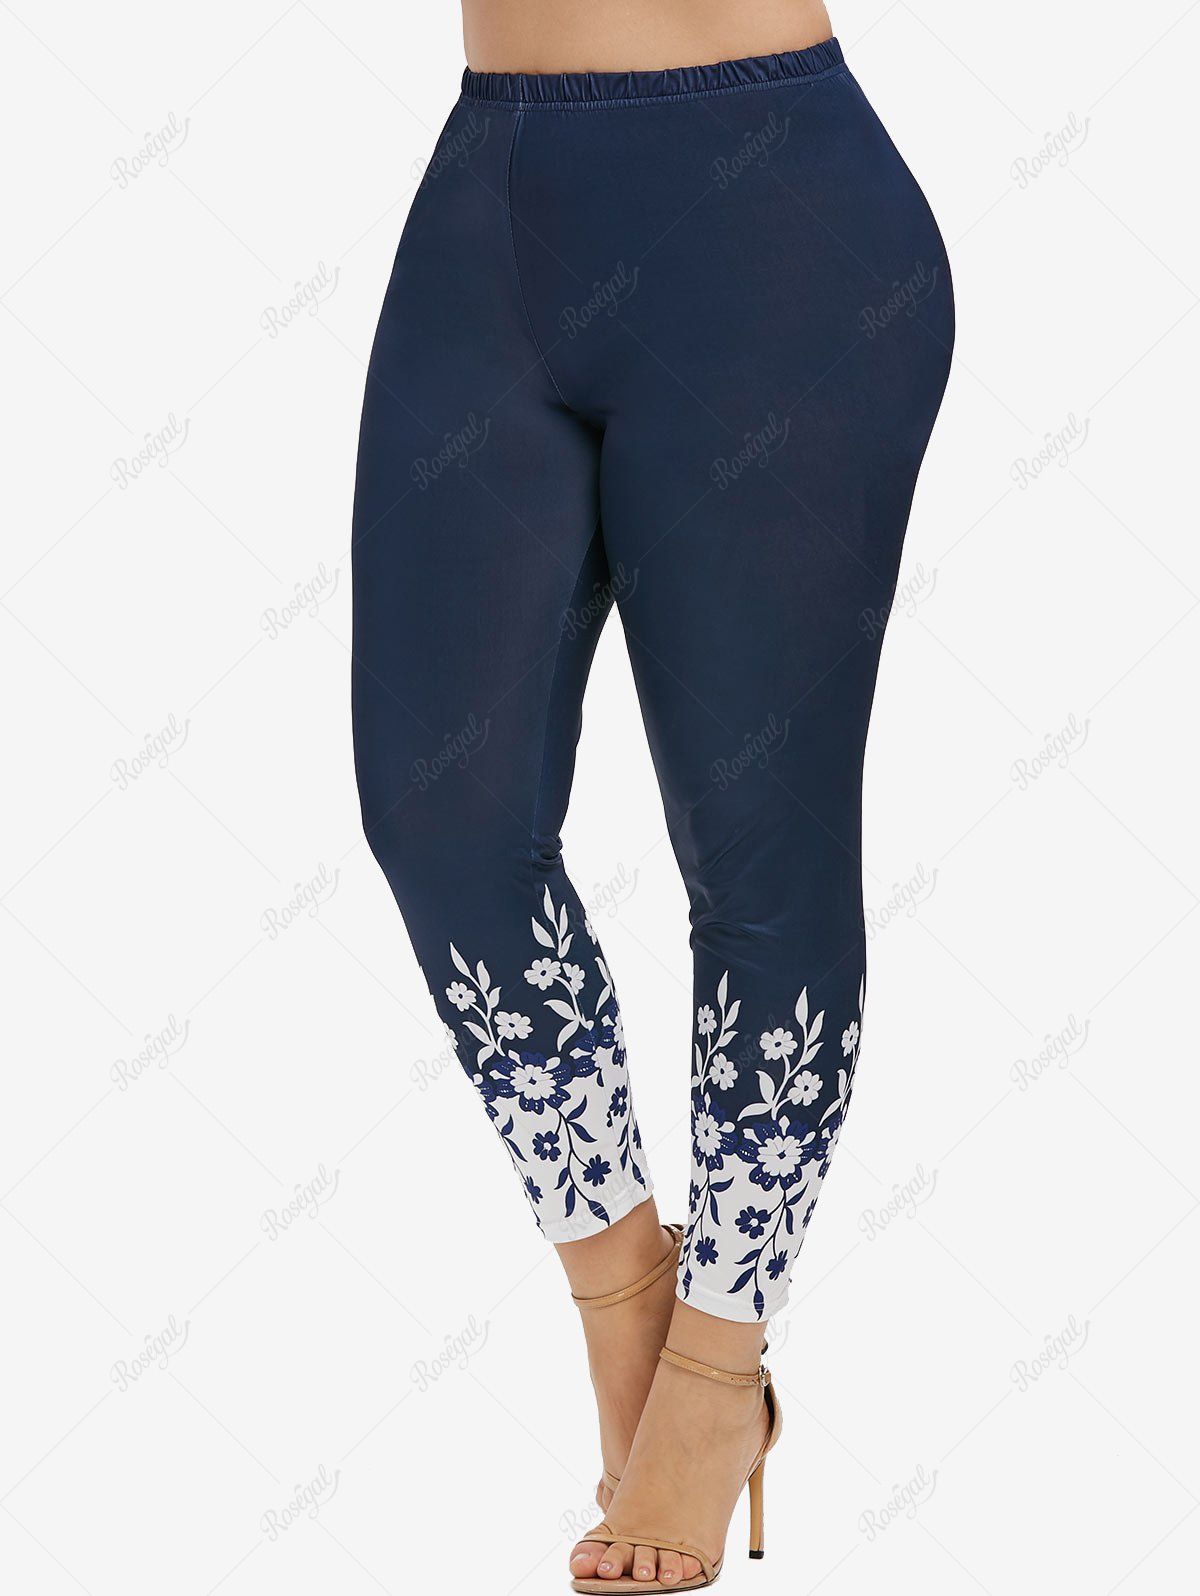 New Plus Size High Waisted Floral Print Skinny Leggings  